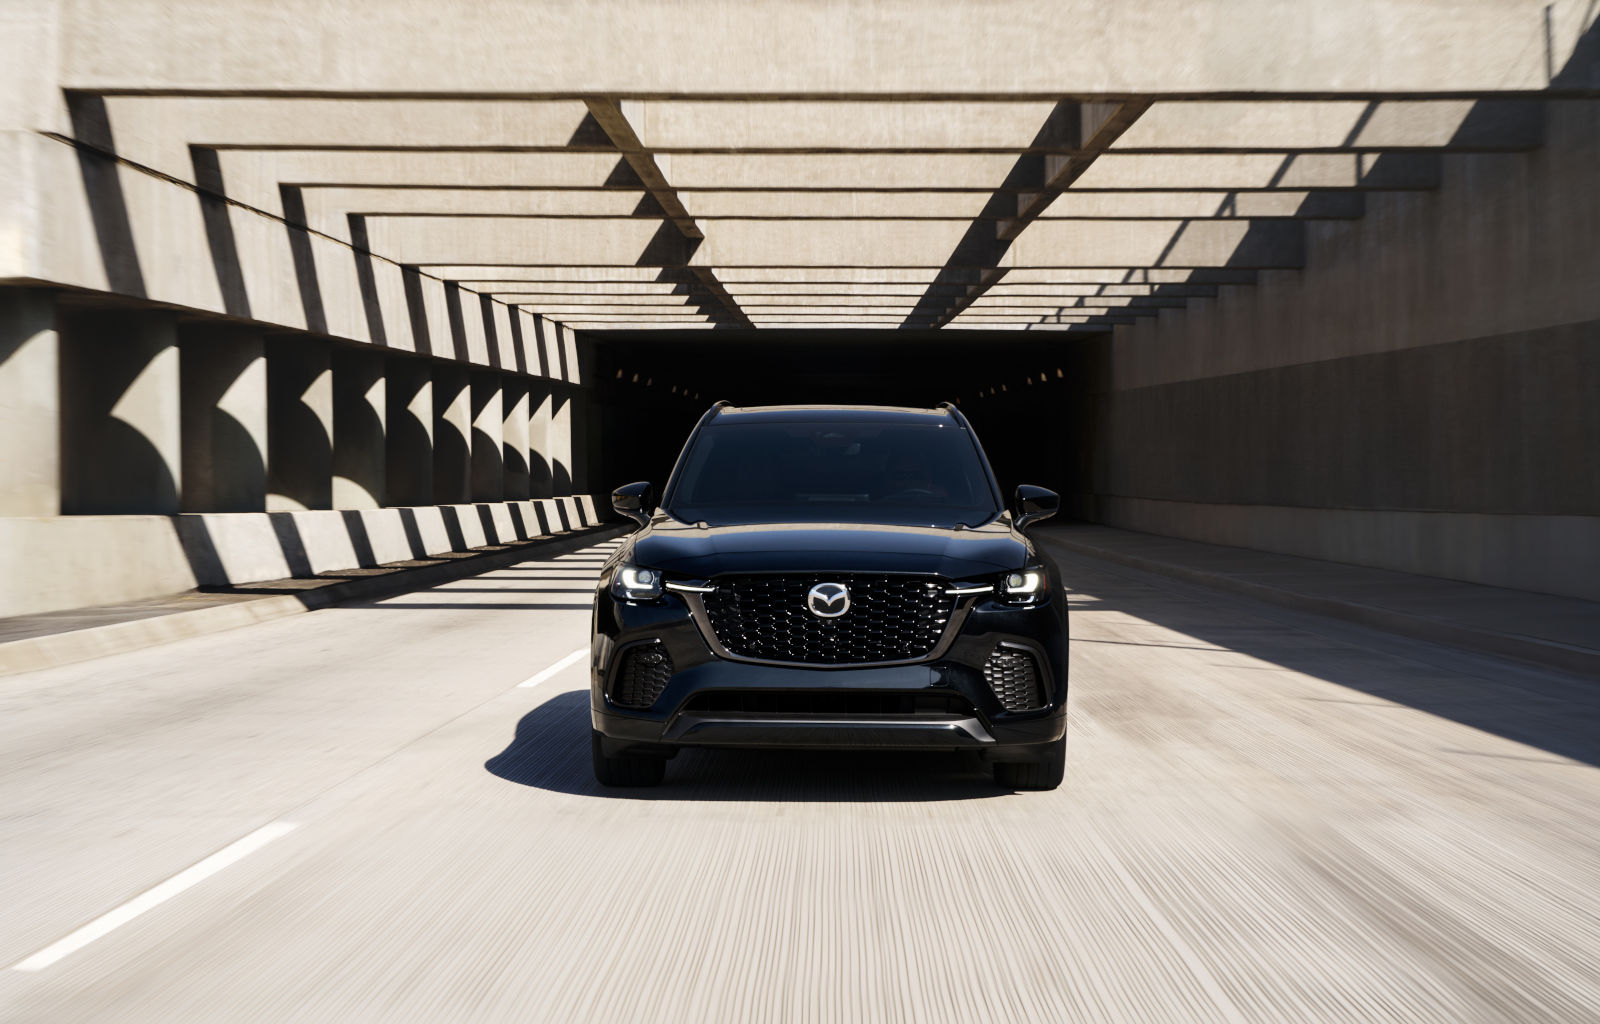 Our First Look at the Prices of the new 2025 Mazda CX-70